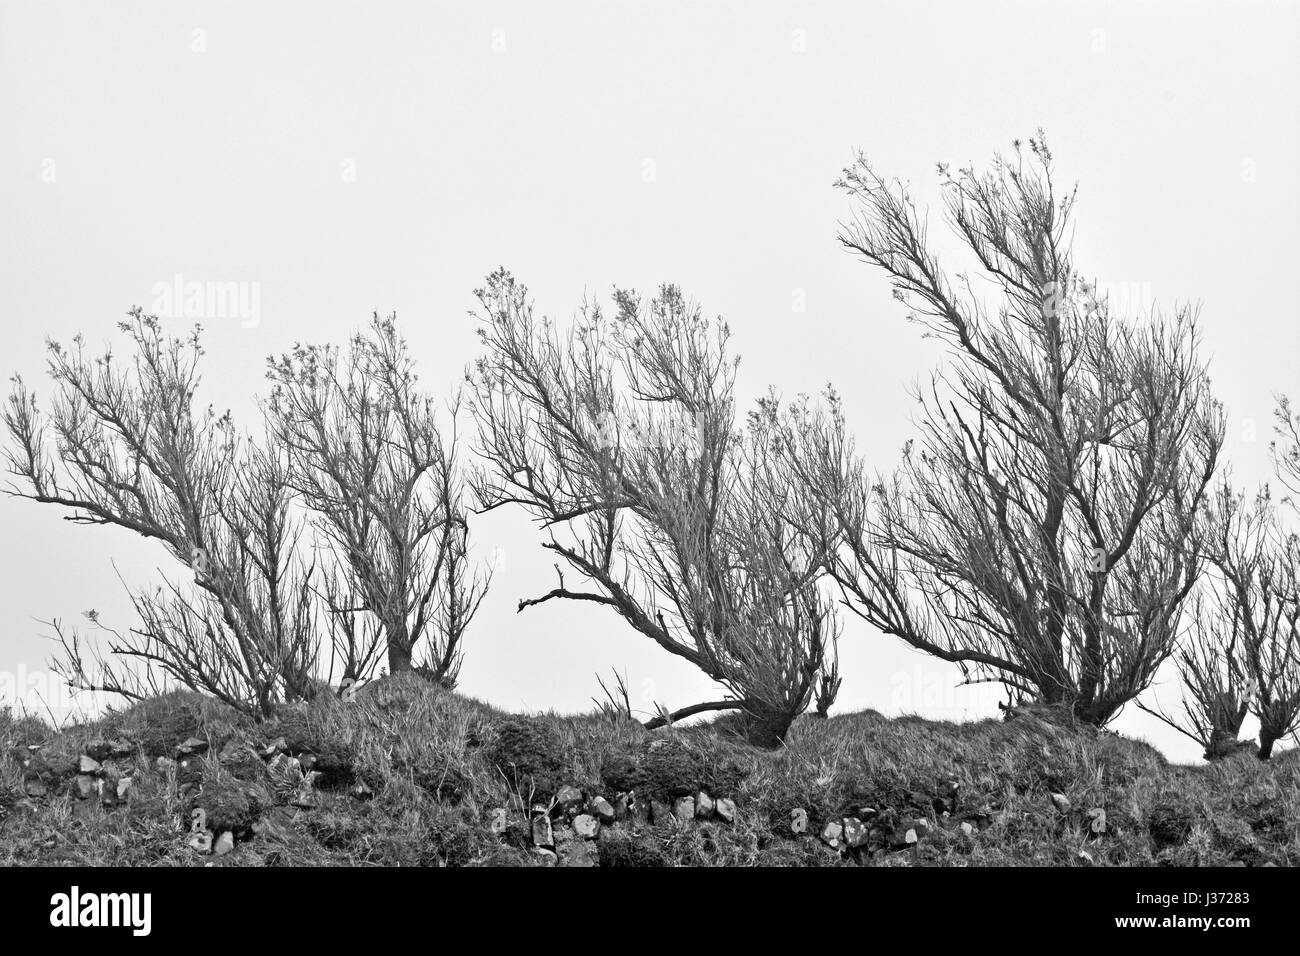 Windswept Trees In Black And White Stock Photo